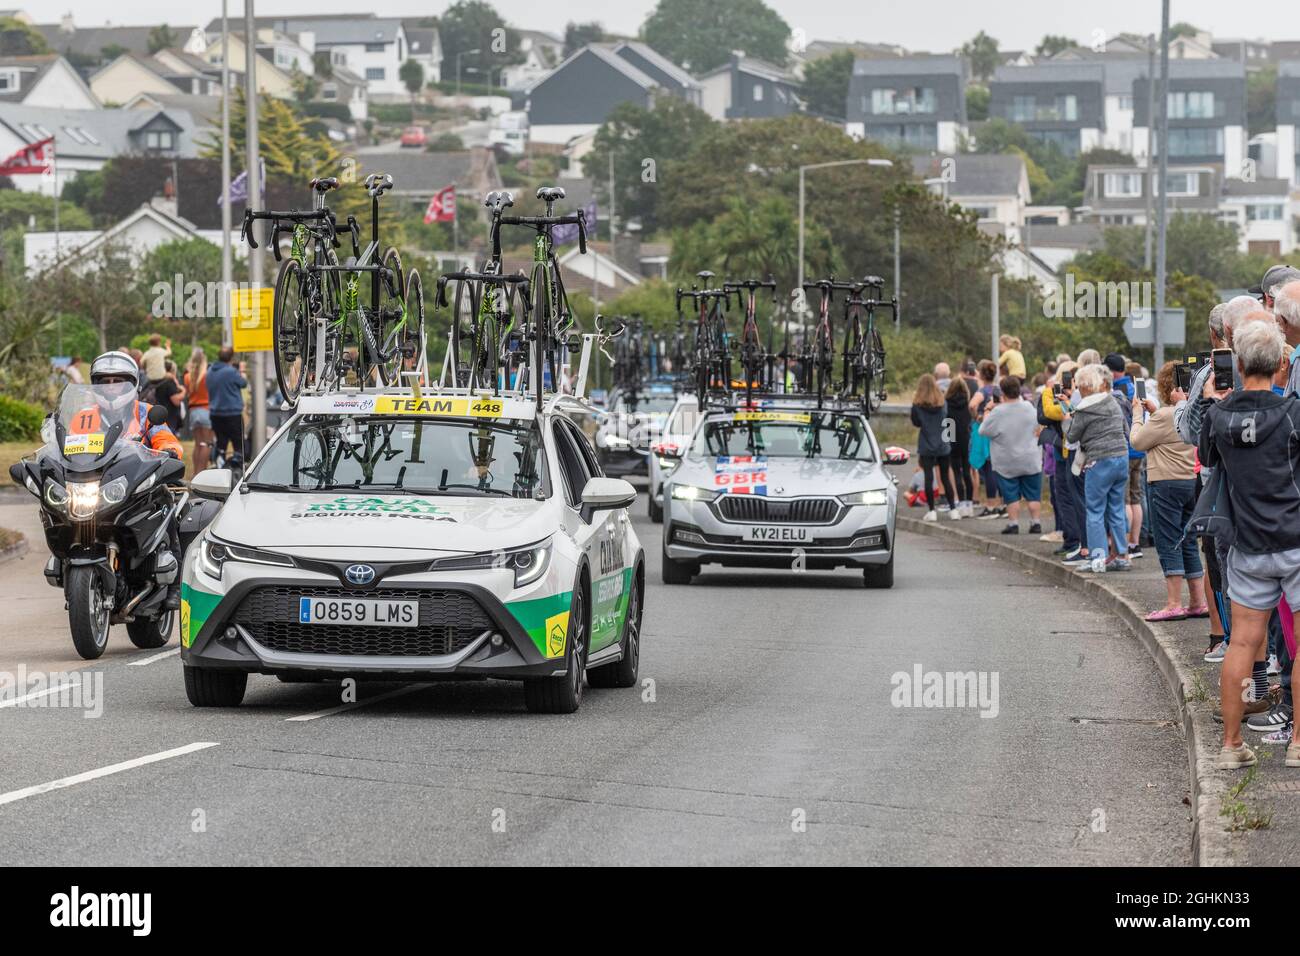 The Team Caja Rural-Seguros RGA support vehicle car following the peloton in the opening stage of the iconic Tour of Britain 2021 - known as The Grand Stock Photo